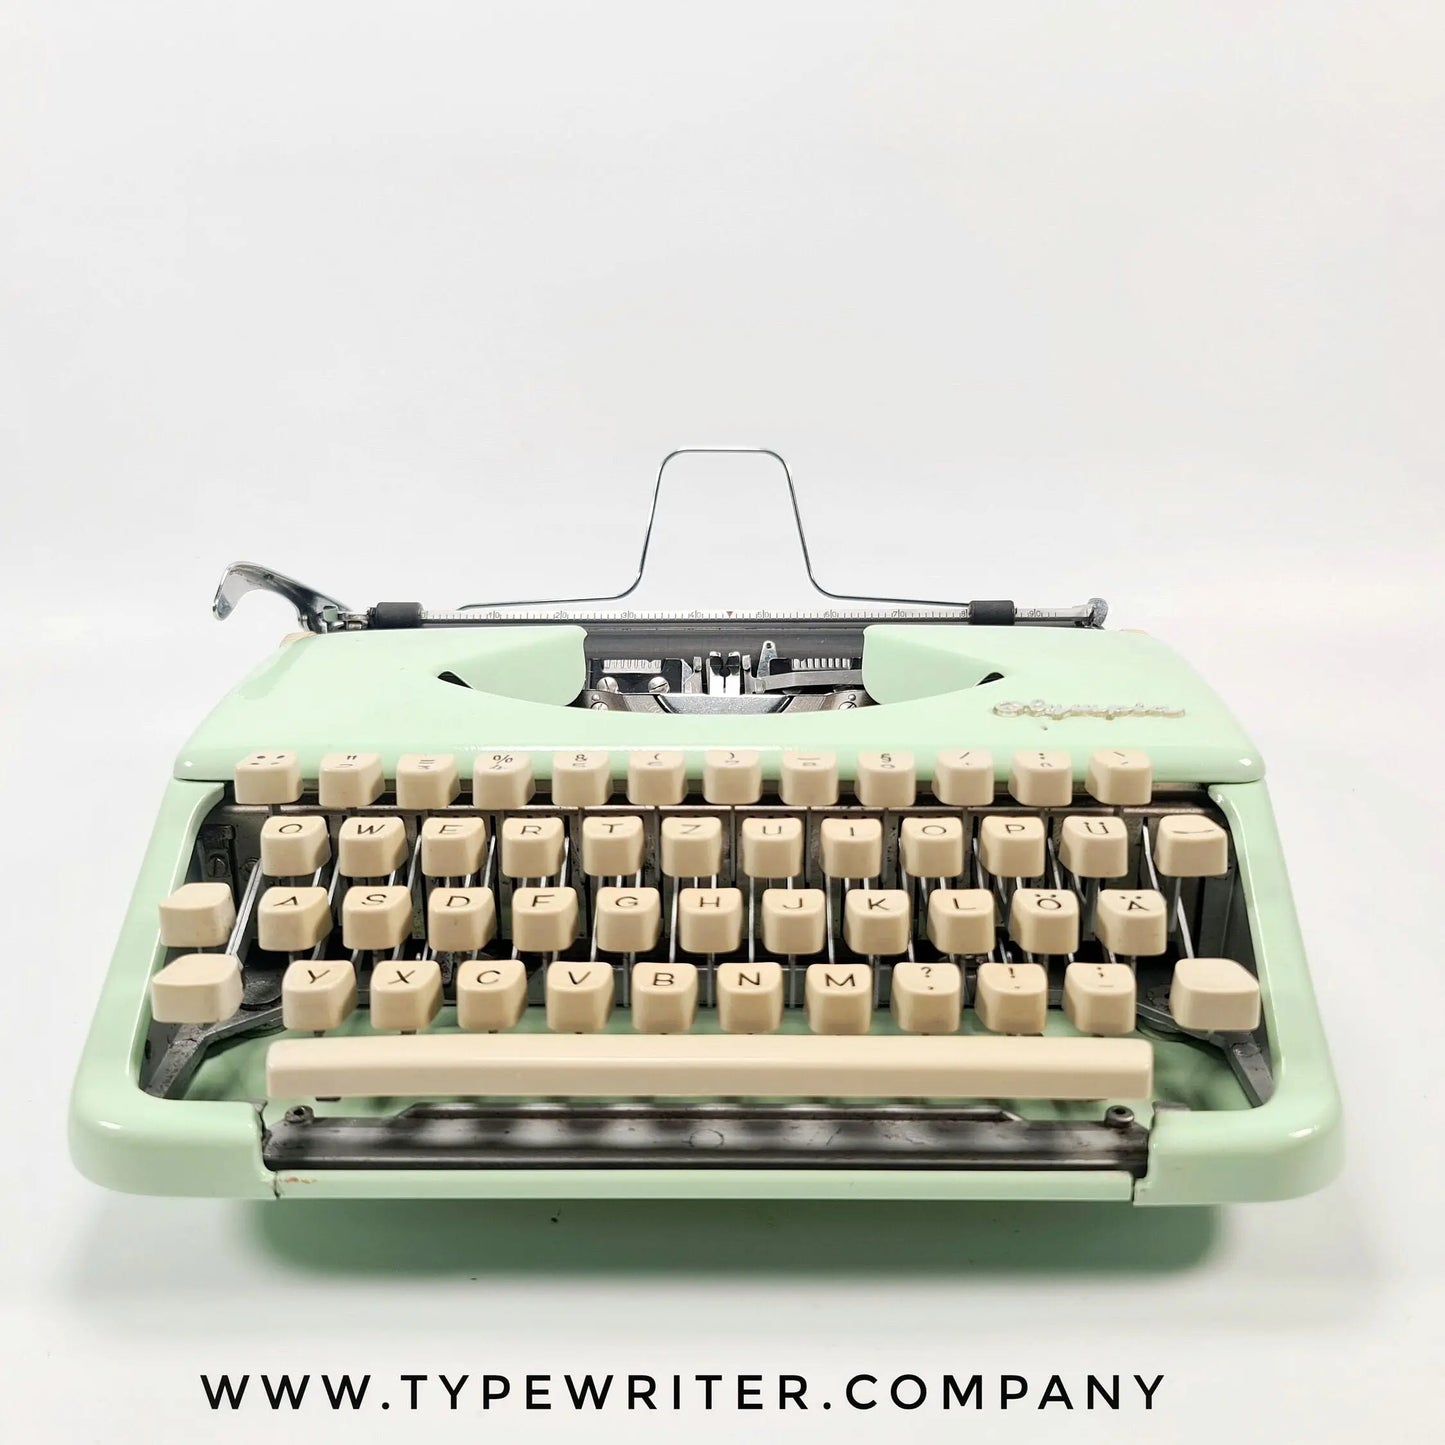 PRO Olympia Splendid Mint Green Typewriter, Vintage, Mint Condition, Manual Portable, Professionally Serviced by Typewriter.Company - ElGranero Typewriter.Company